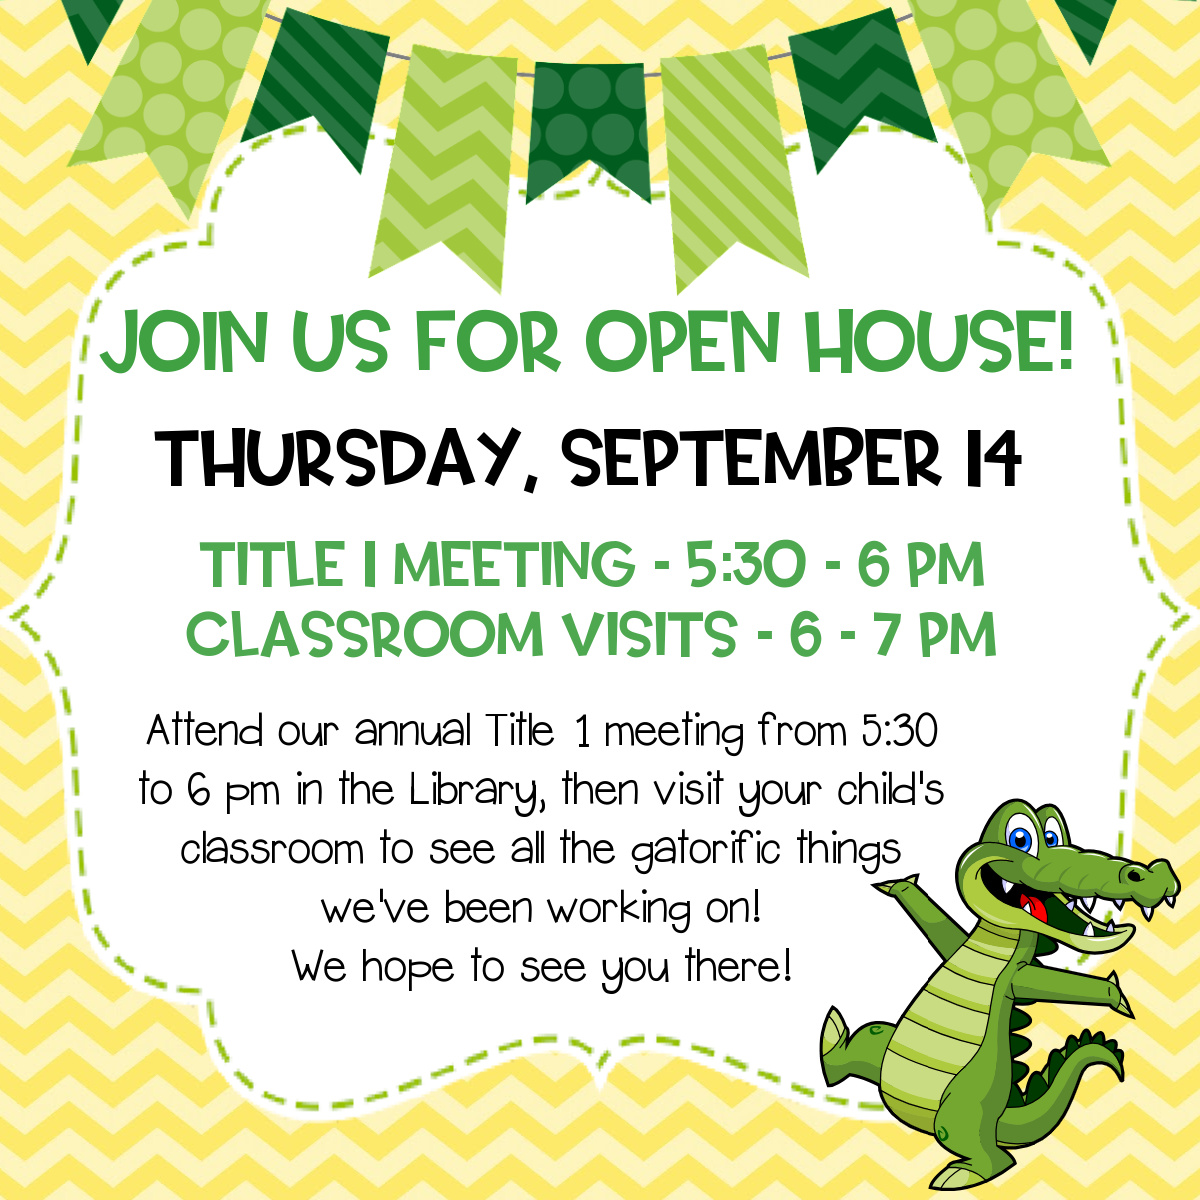 Open House & our annual Title 1 Meeting are this Thursday, September 14! The Title 1 meeting will be held in the library from 5:30 - 6 pm, followed by our regular Open House activities from 6 to 7 pm. We're so excited to show you the gatorific things we've been working on!